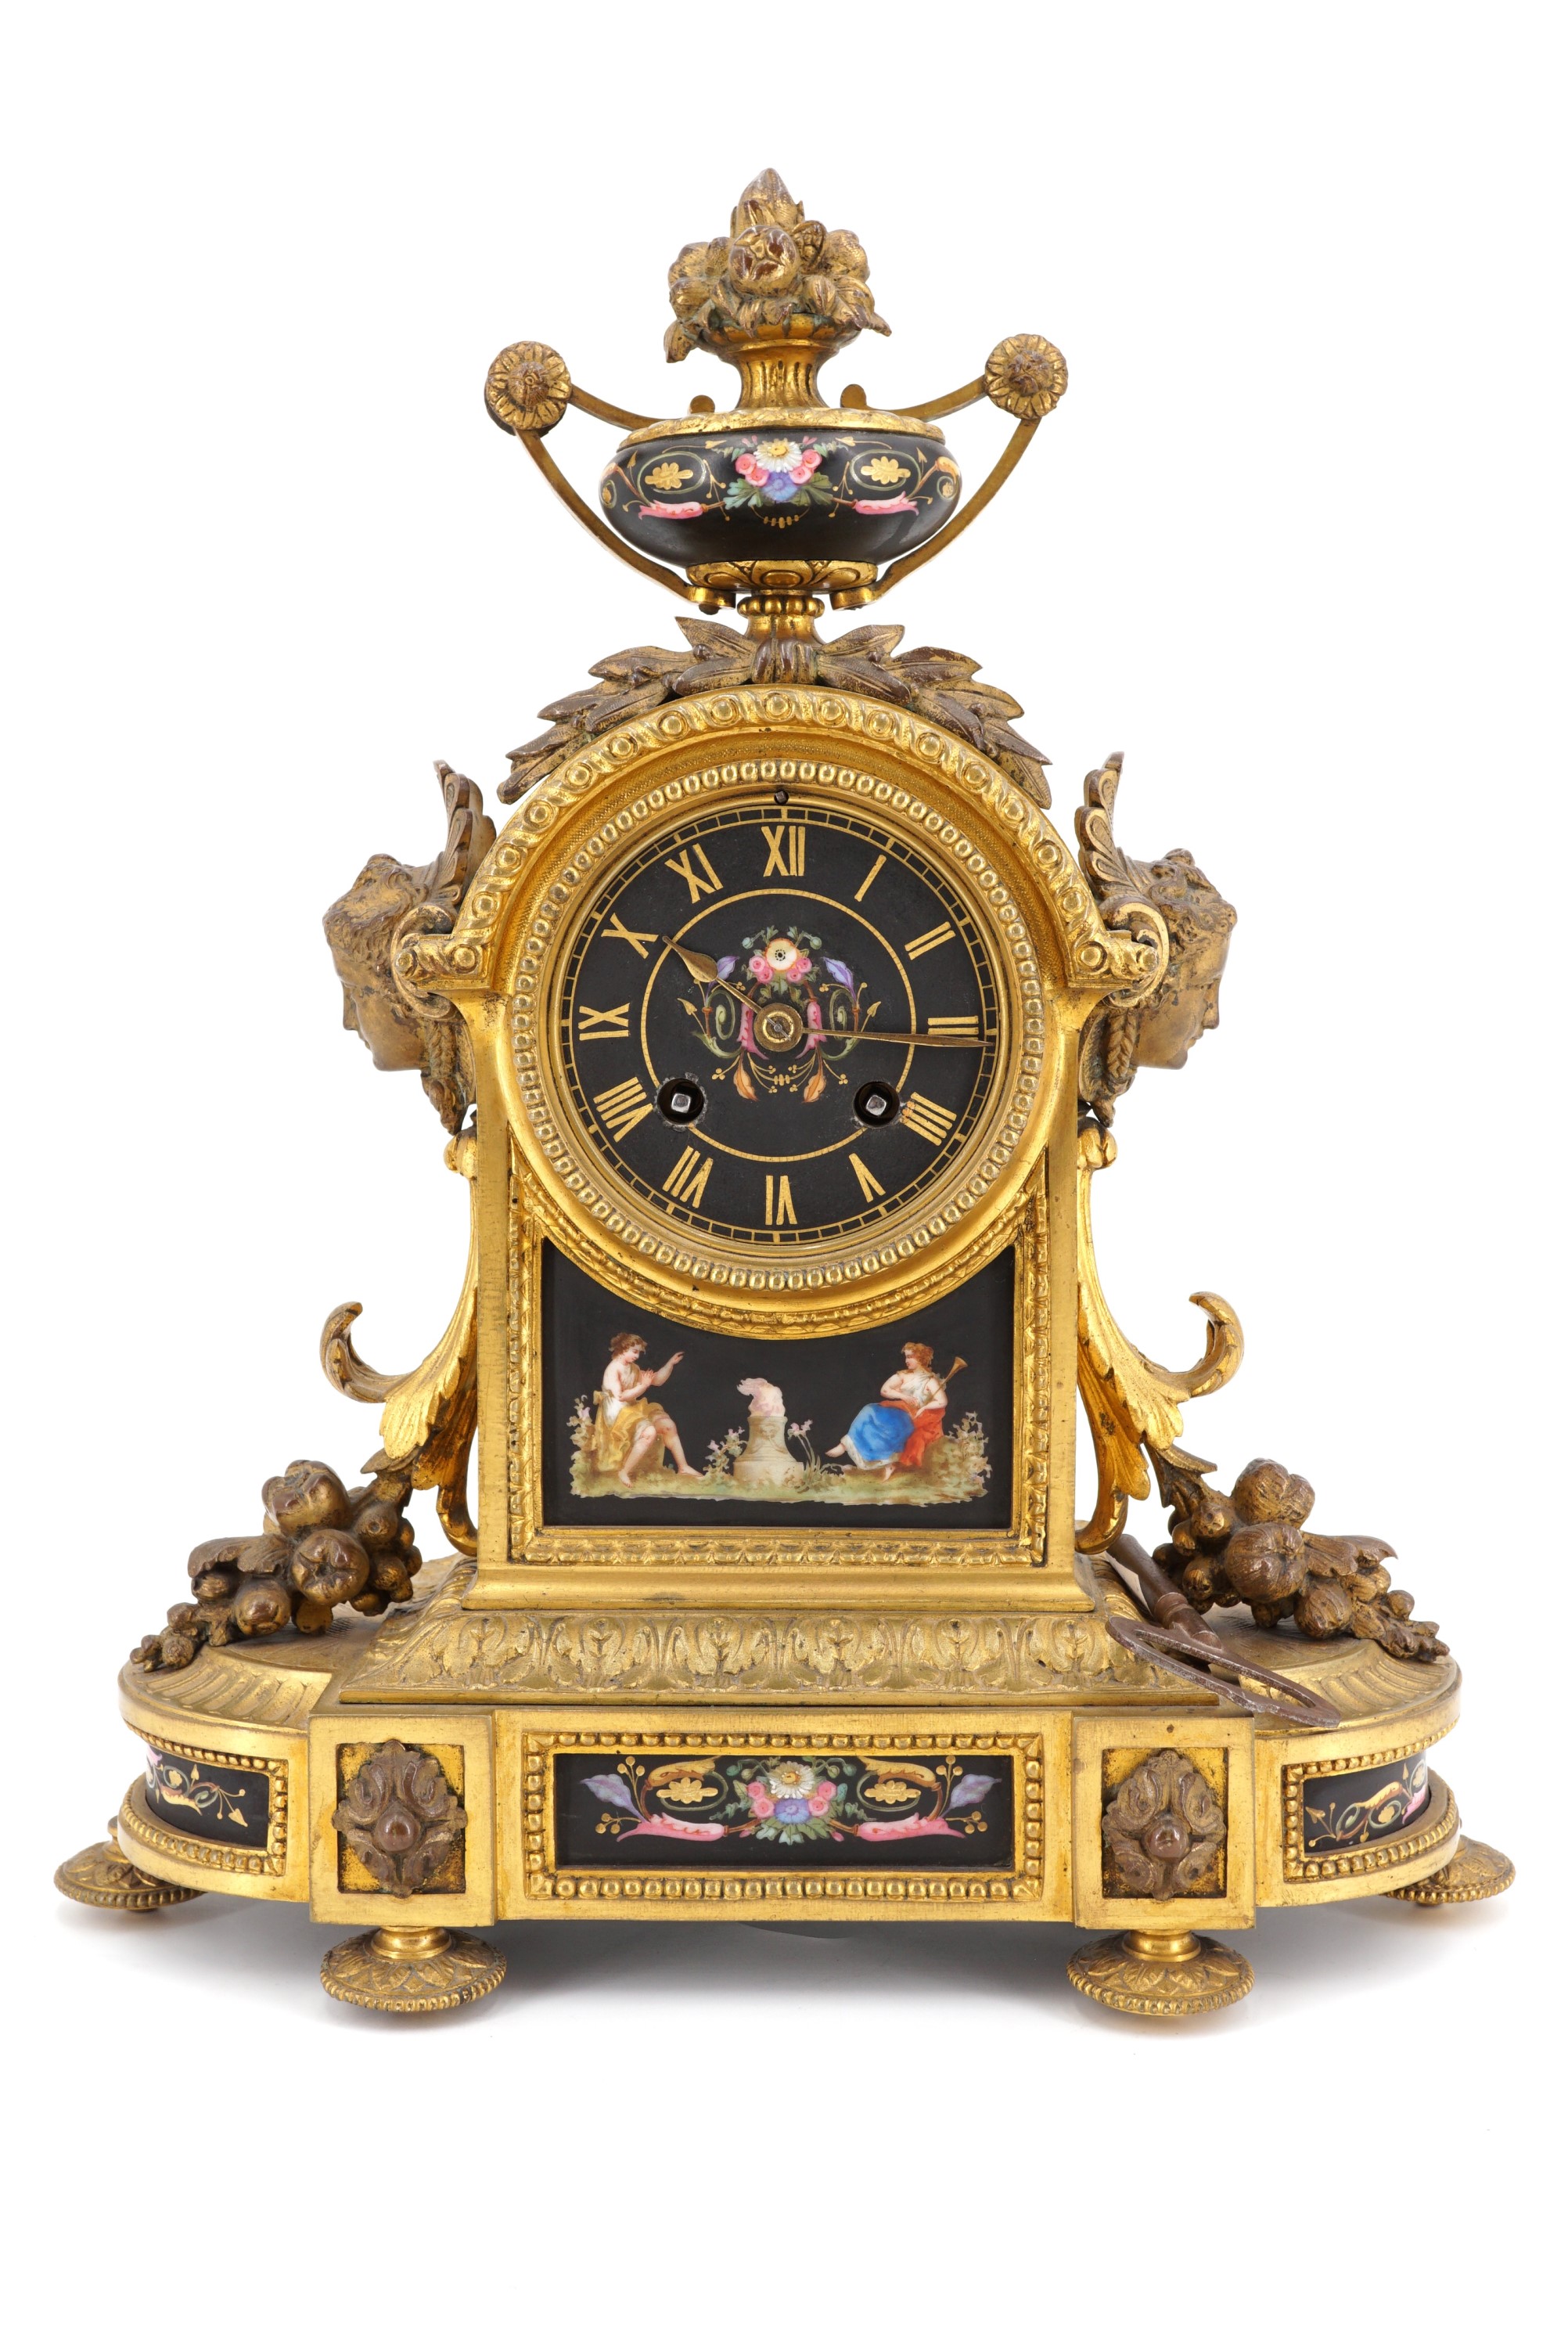 A 19th Century French gilt brass and enamel mantle clock, having a drum movement striking on a bell,